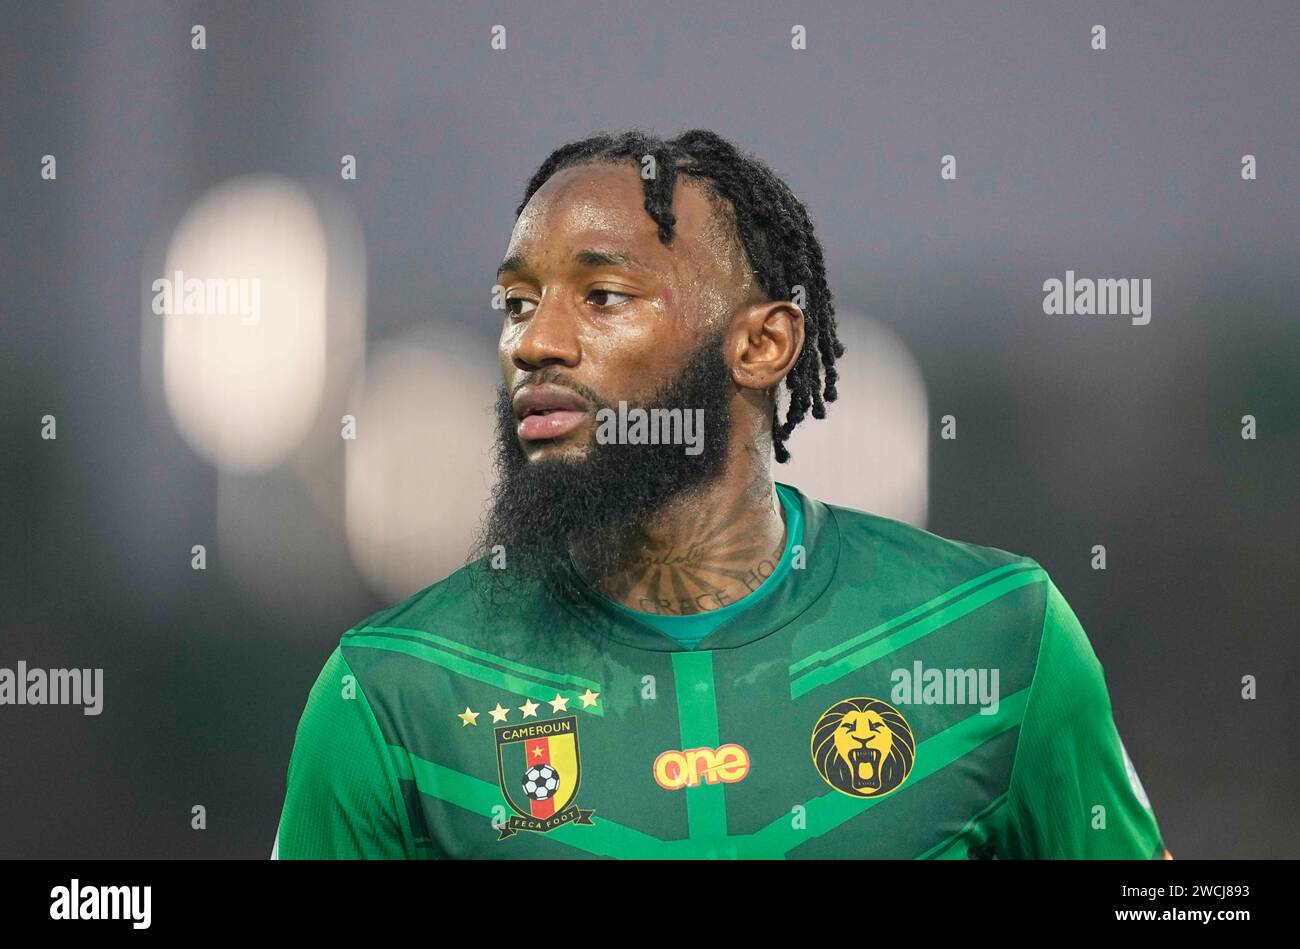 January 15 2024: Georges Kevin Nkoudou Mbida (Cameroon) looks on during a African Cup of Nations Group C game, Cameroon vs Guinea, at Stade Charles Konan Banny, Yamoussoukro, Ivory Coast. Kim Price/CSM Stock Photo